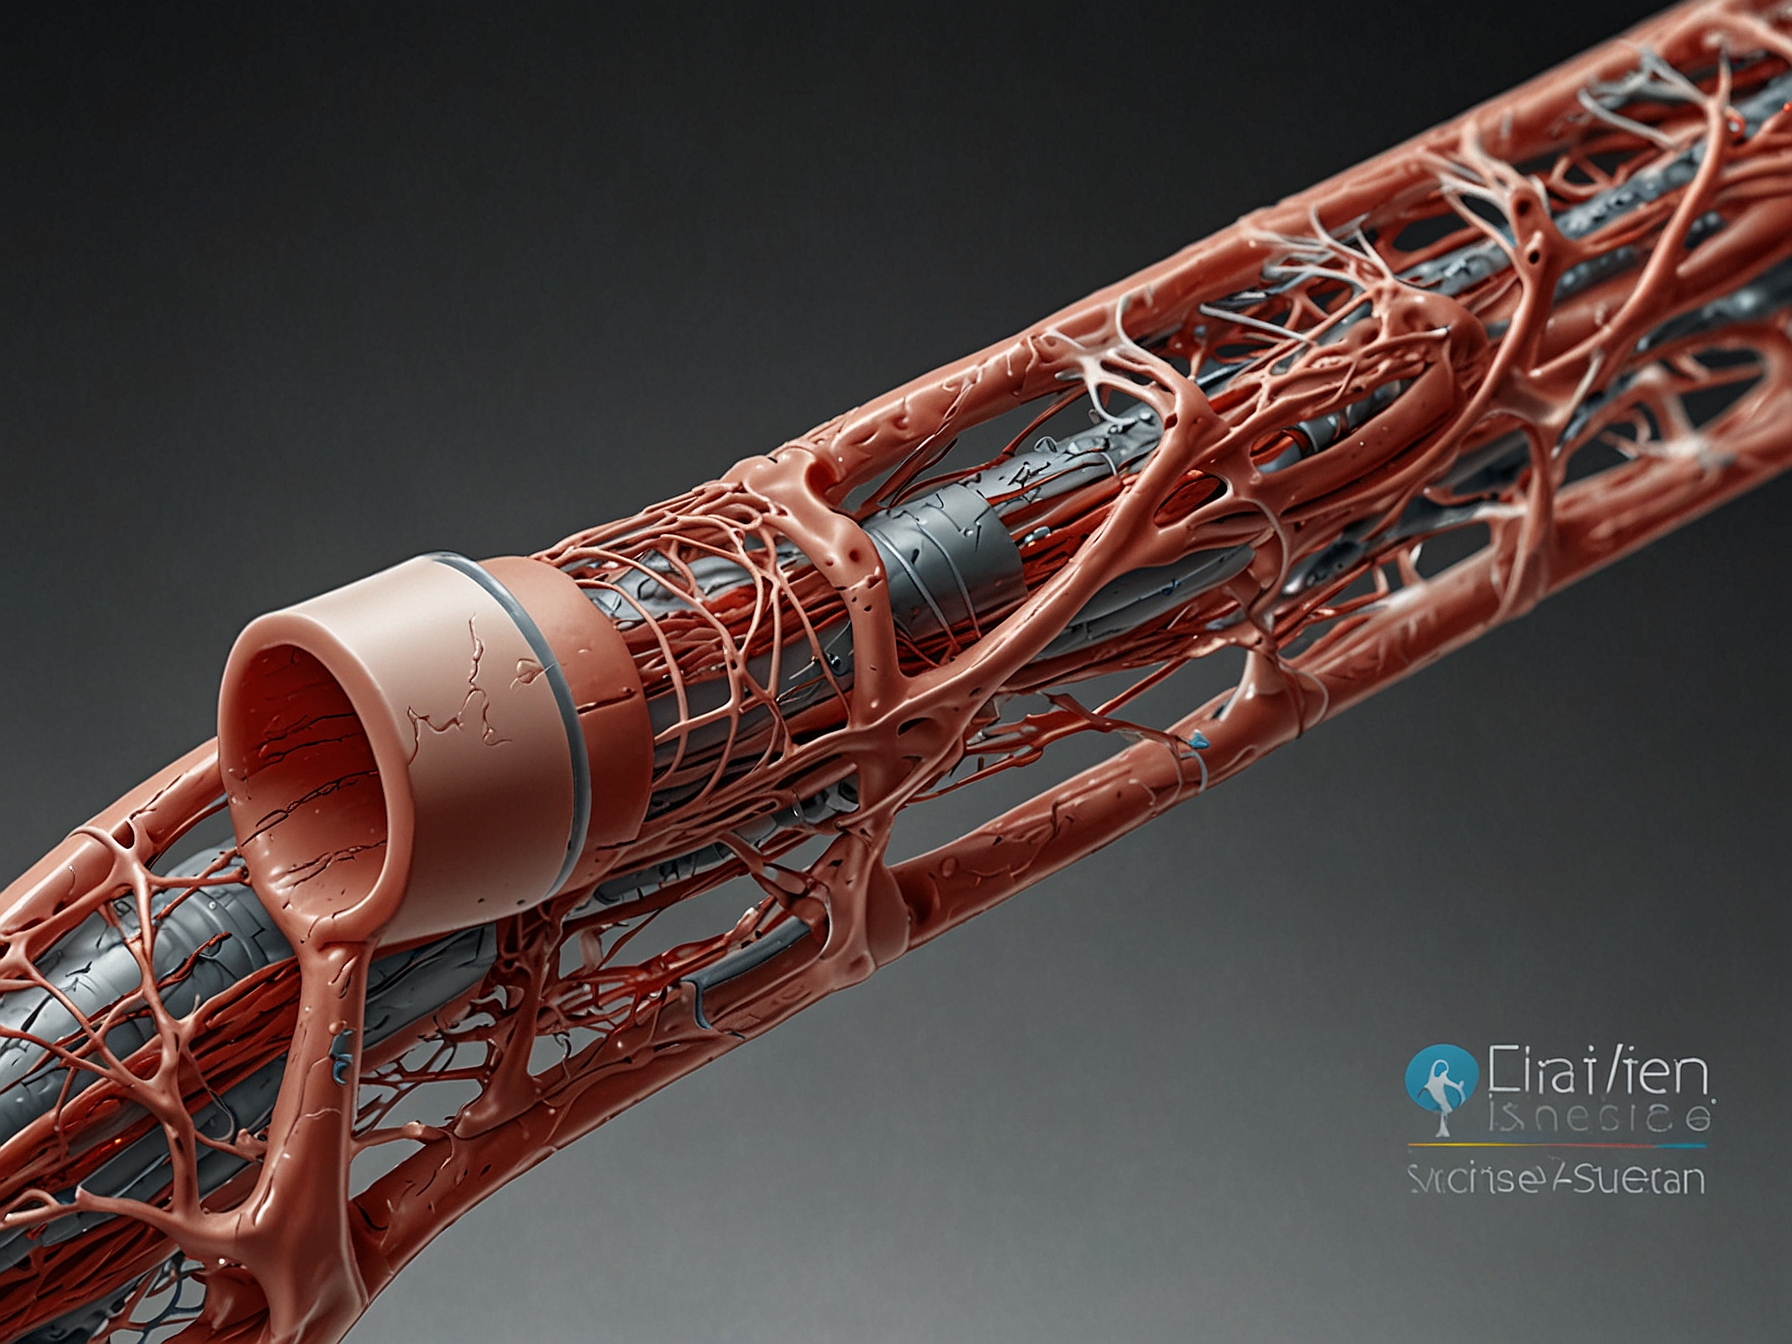 An illustration showing the advanced Nexus aortic arch stent graft system developed by Endospan, highlighting its minimally invasive deployment in treating complex aortic conditions.